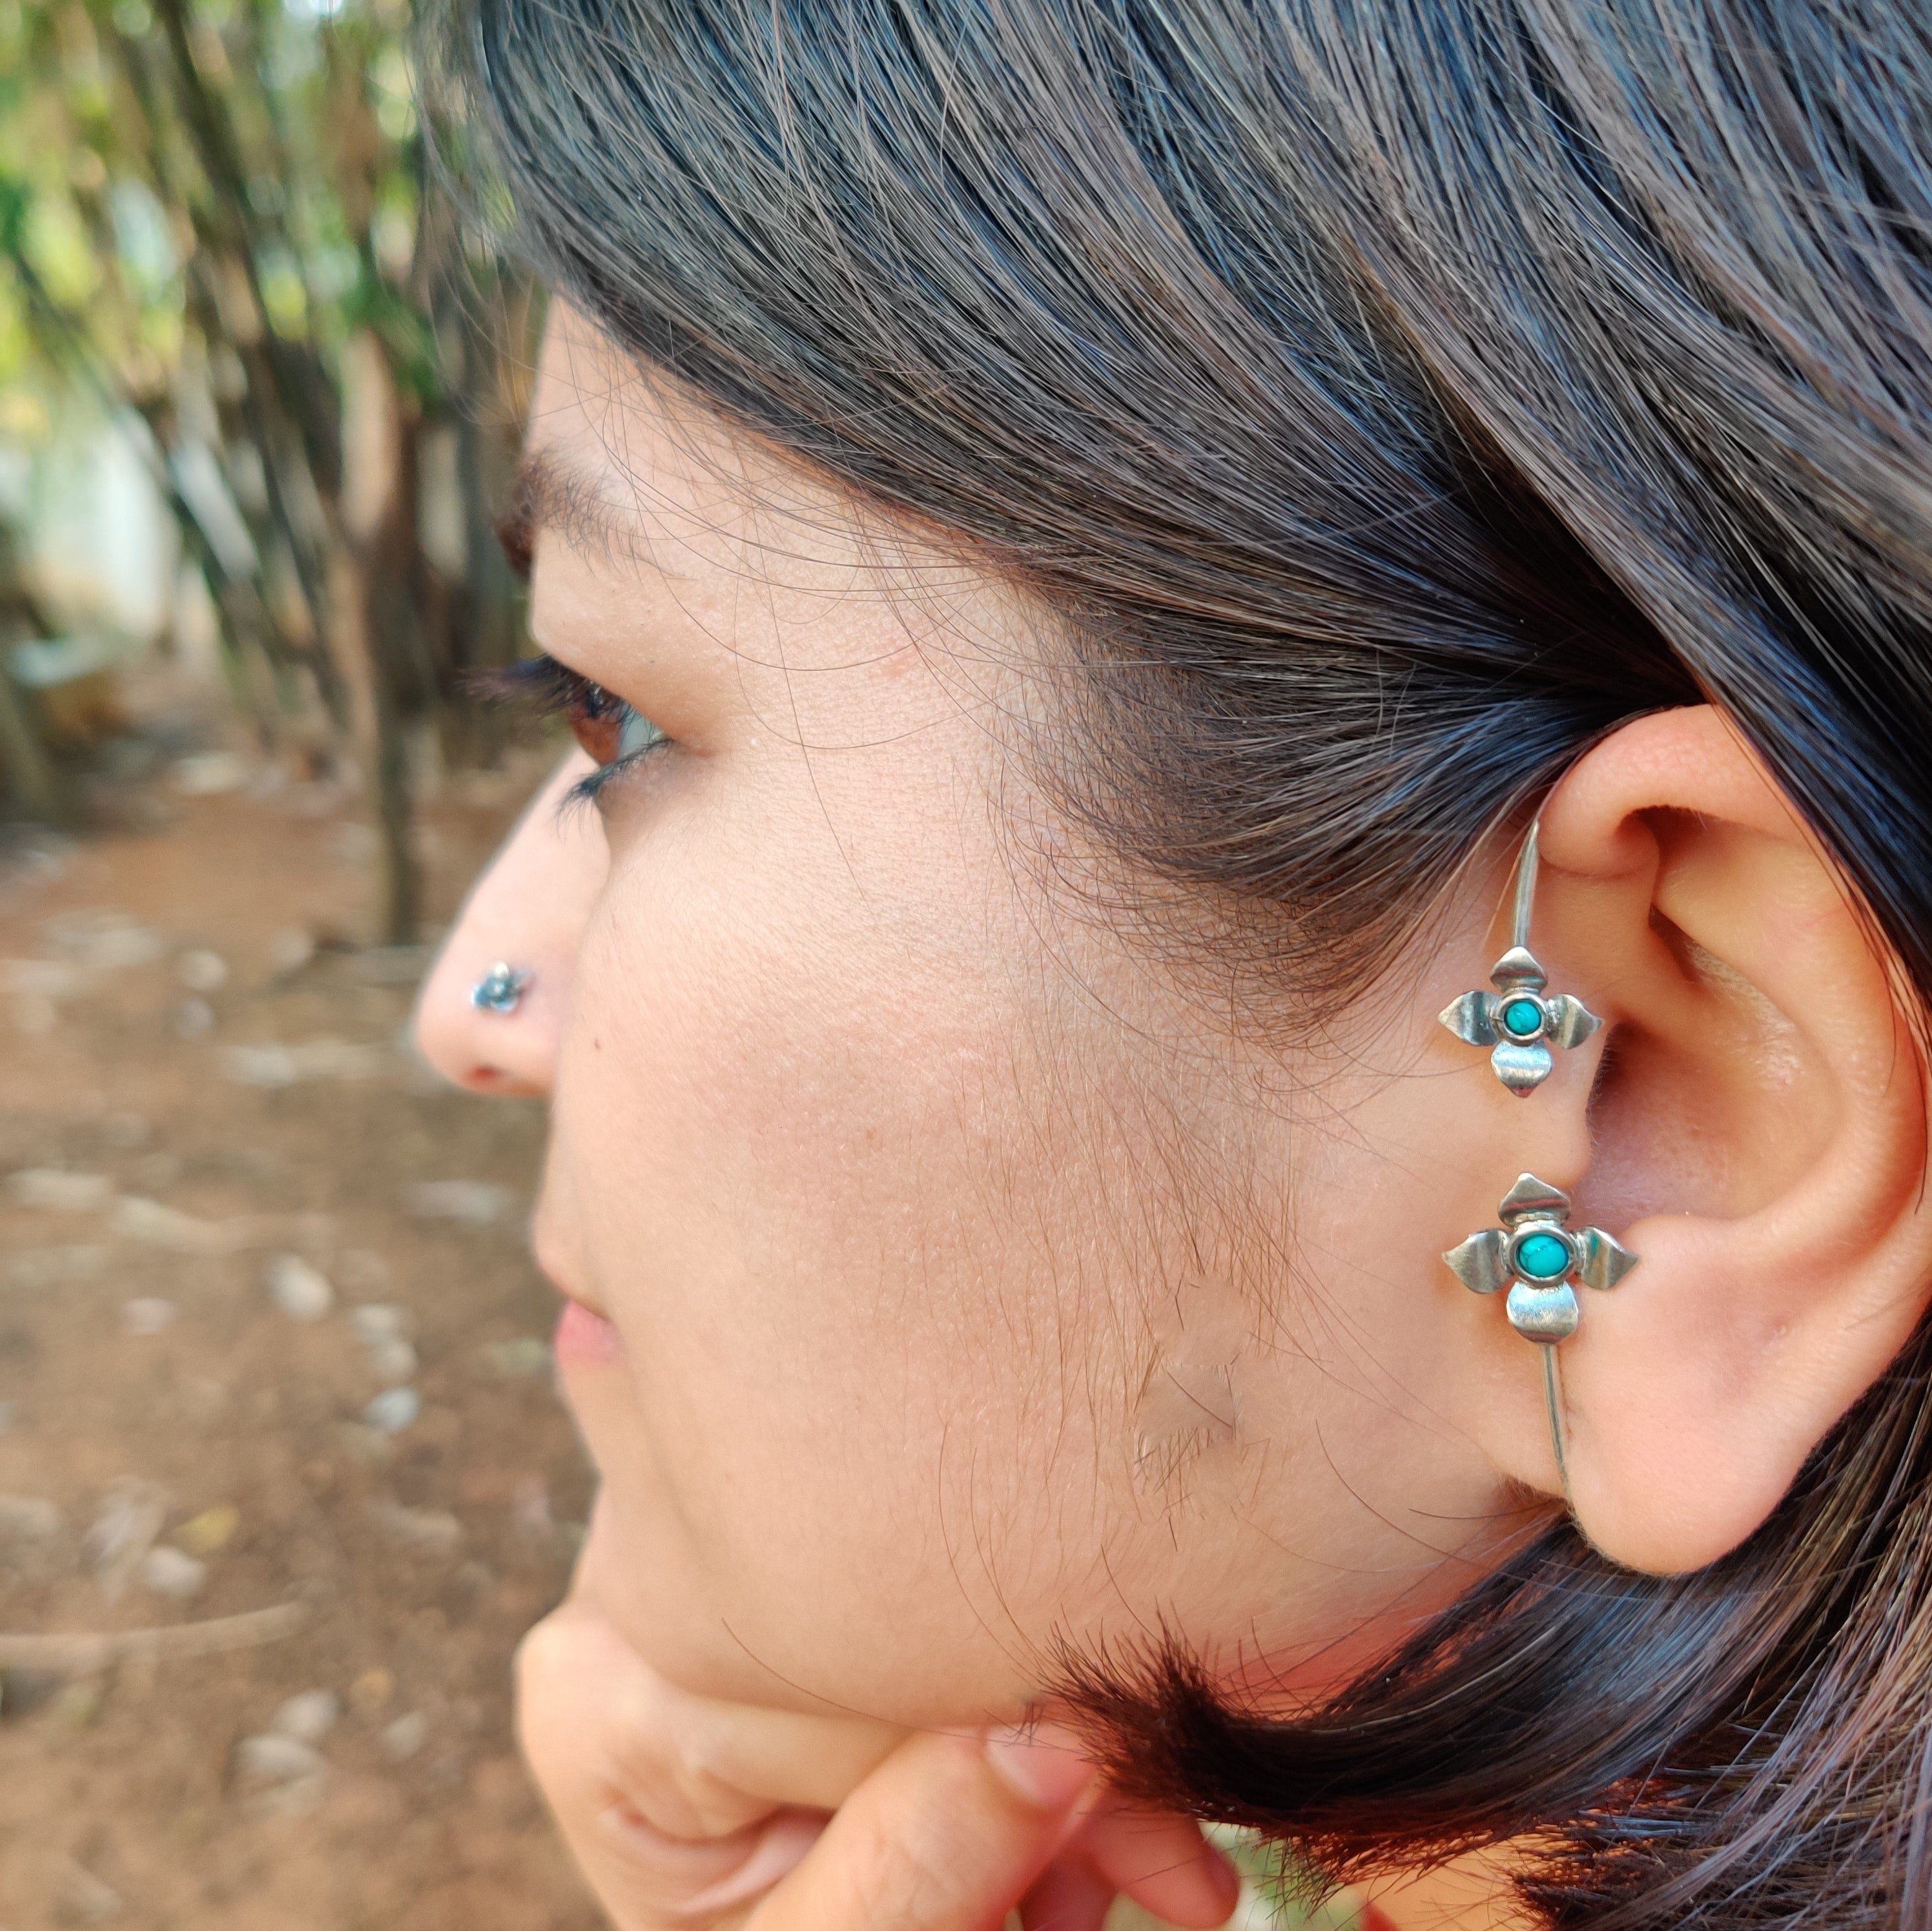 Buy Silver Ear Cuffs online at Best Prices in India - Quirksmith 